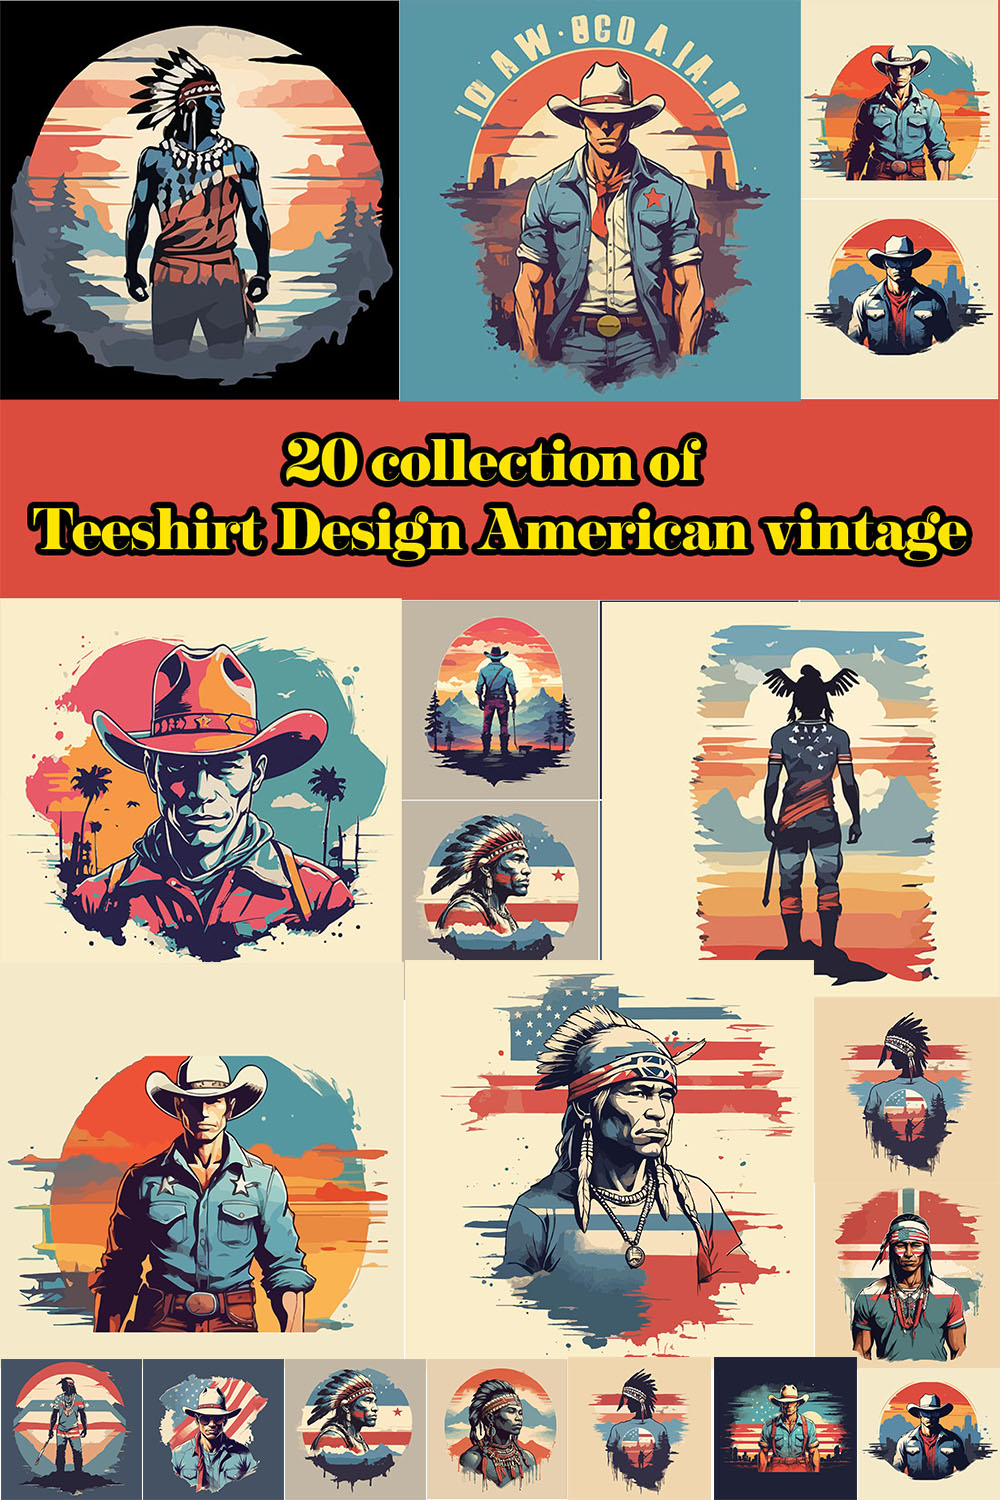 20 collection of Teeshirt Design American vintage pinterest preview image.